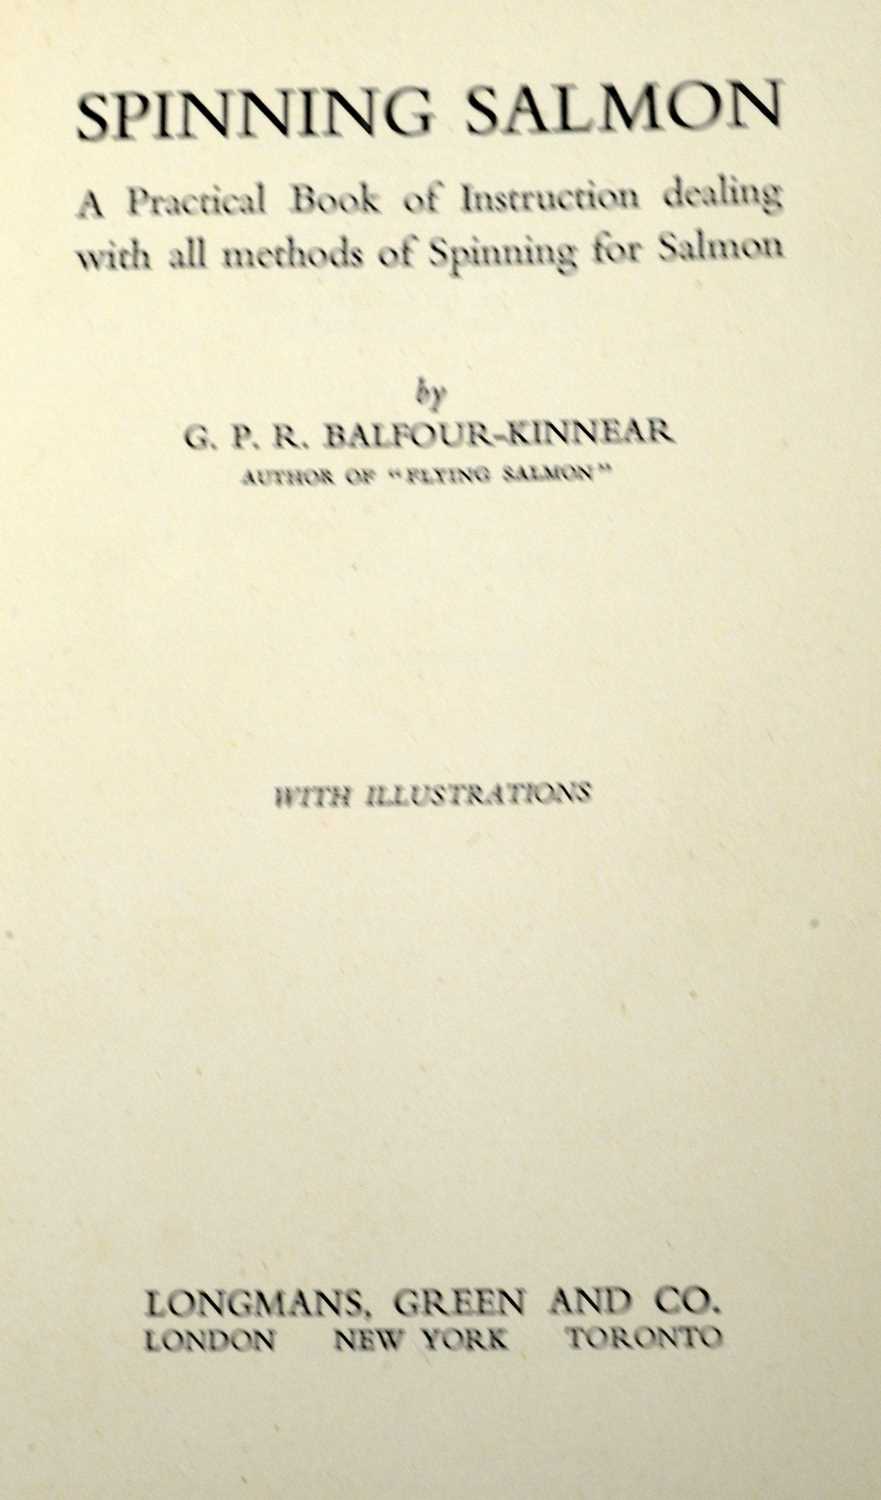 Balfour-Kinnear (G.P.R.) Catching Salmon and Sea-trout, and books on angling - Image 4 of 5